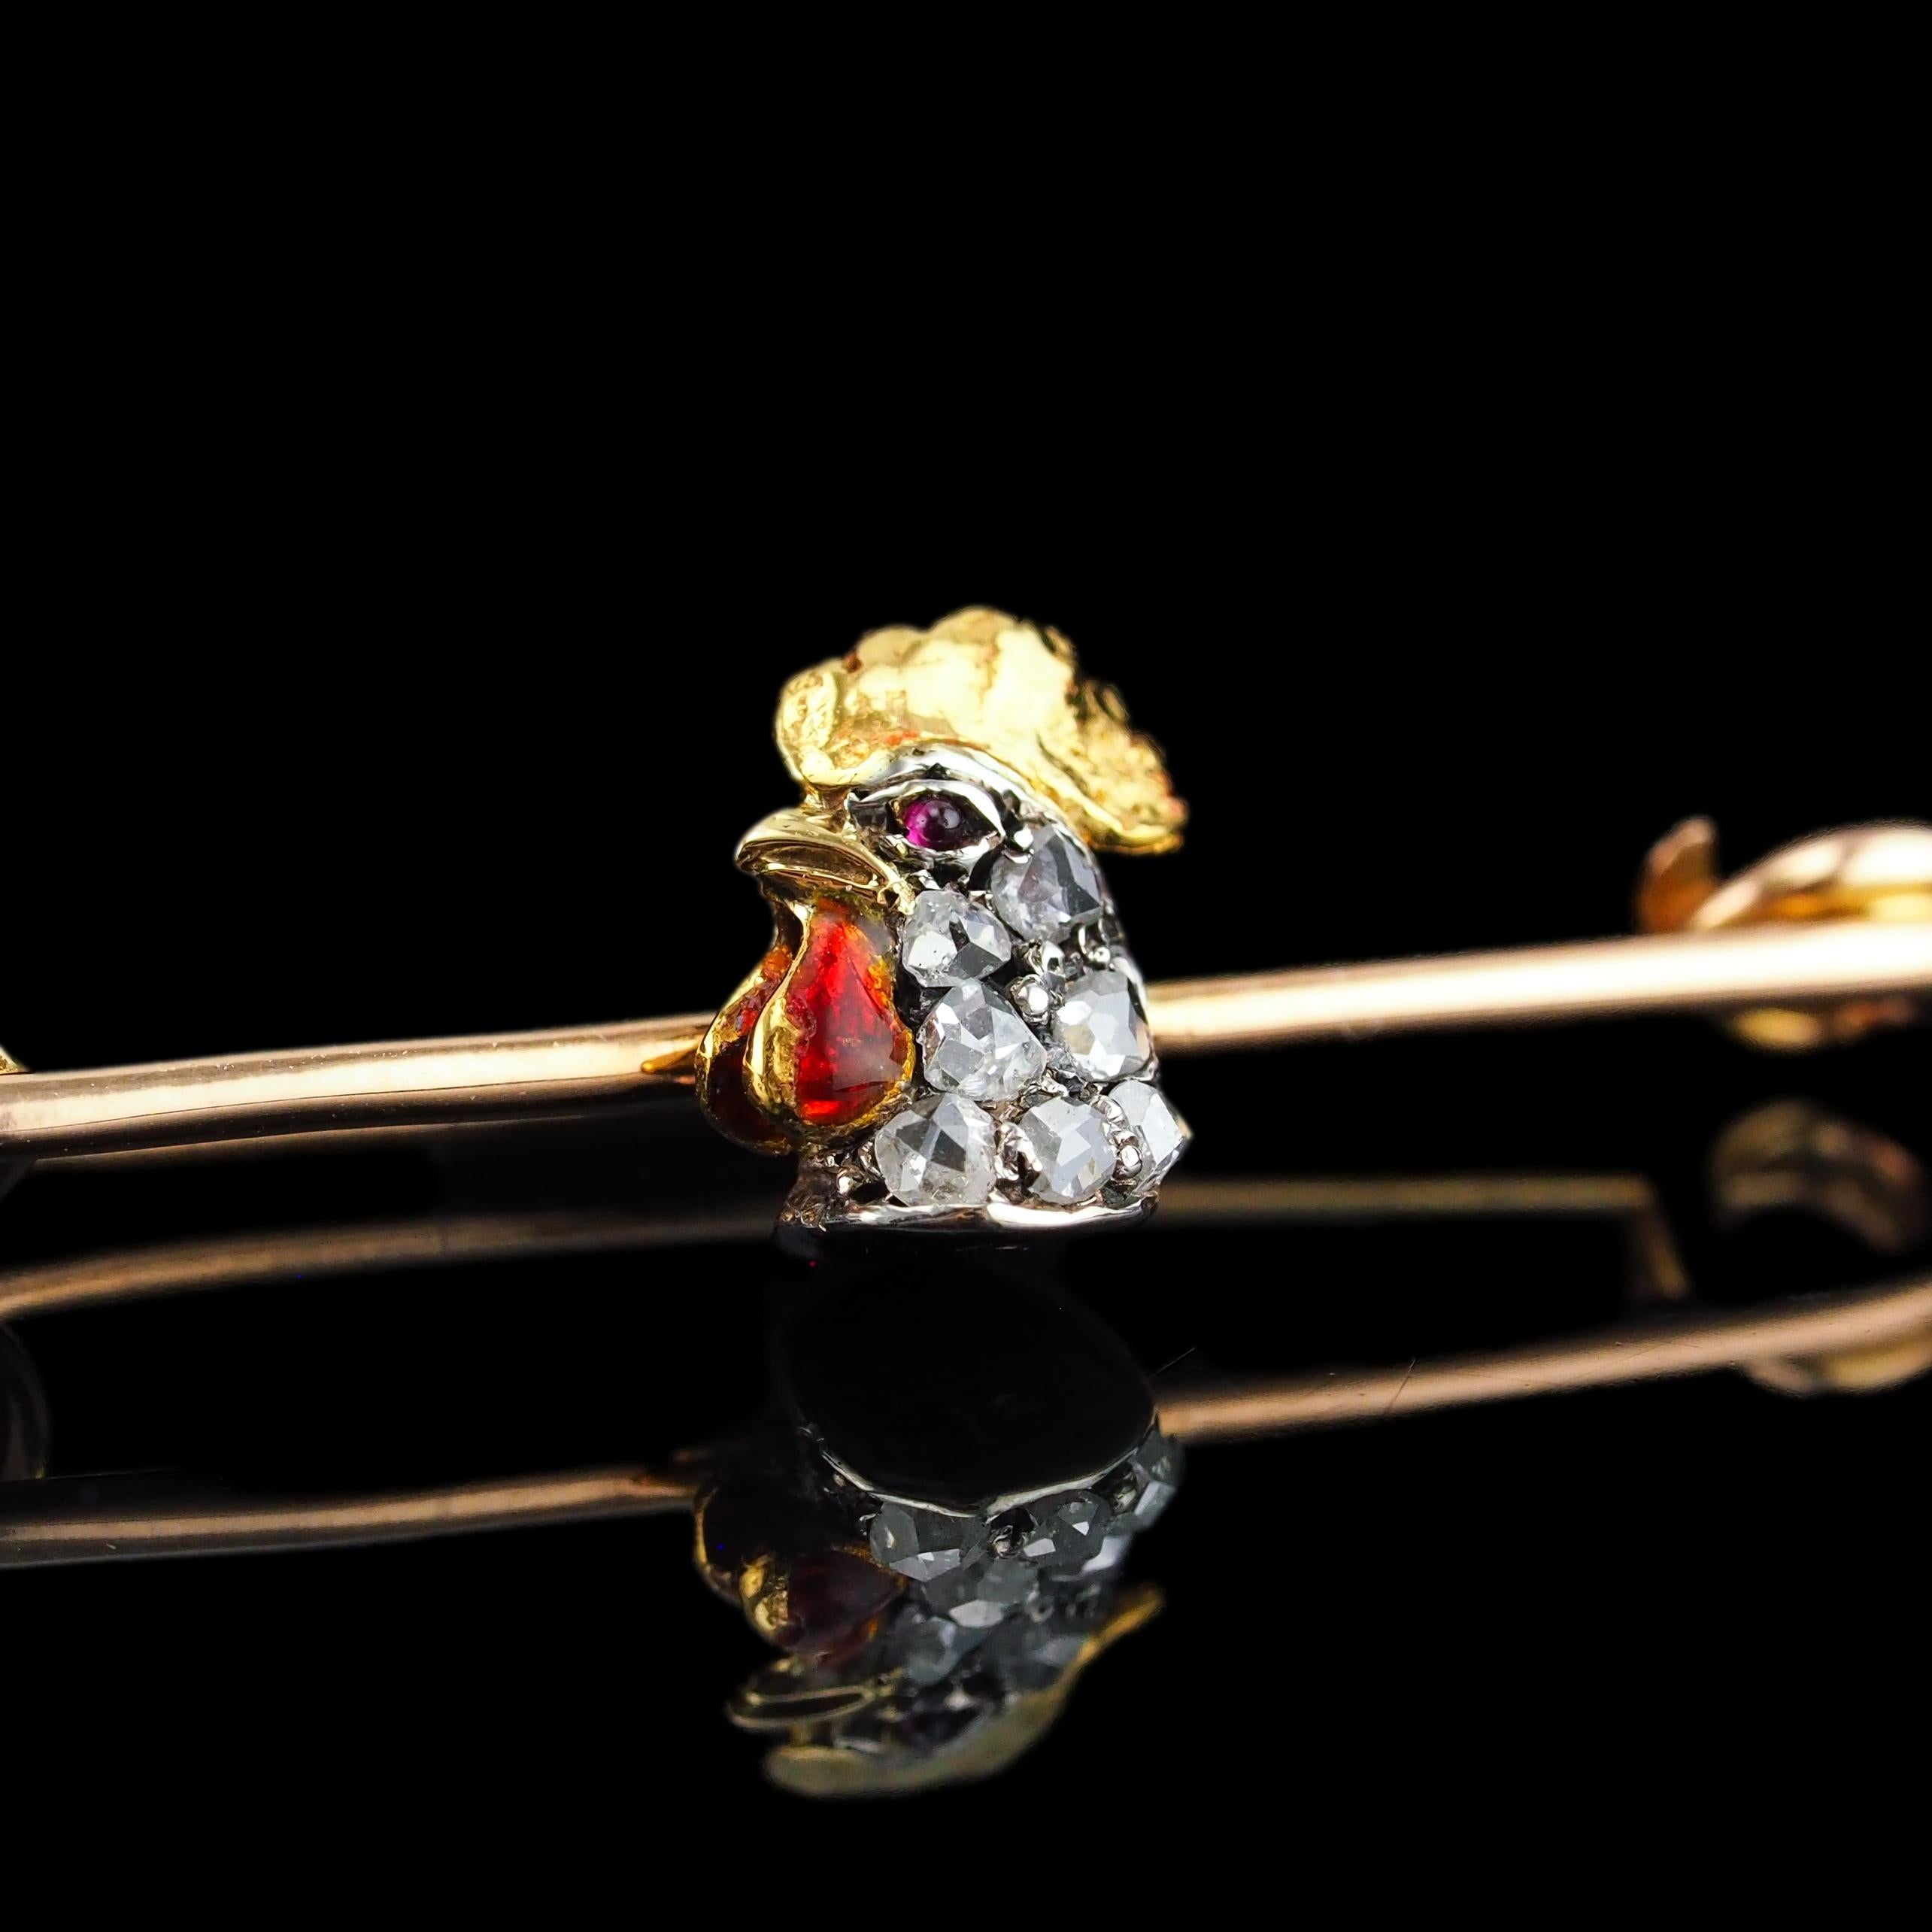 Antique Victorian Diamond and Ruby 15K Gold Cockerel/Rooster/Chicken Brooch Pin For Sale 3